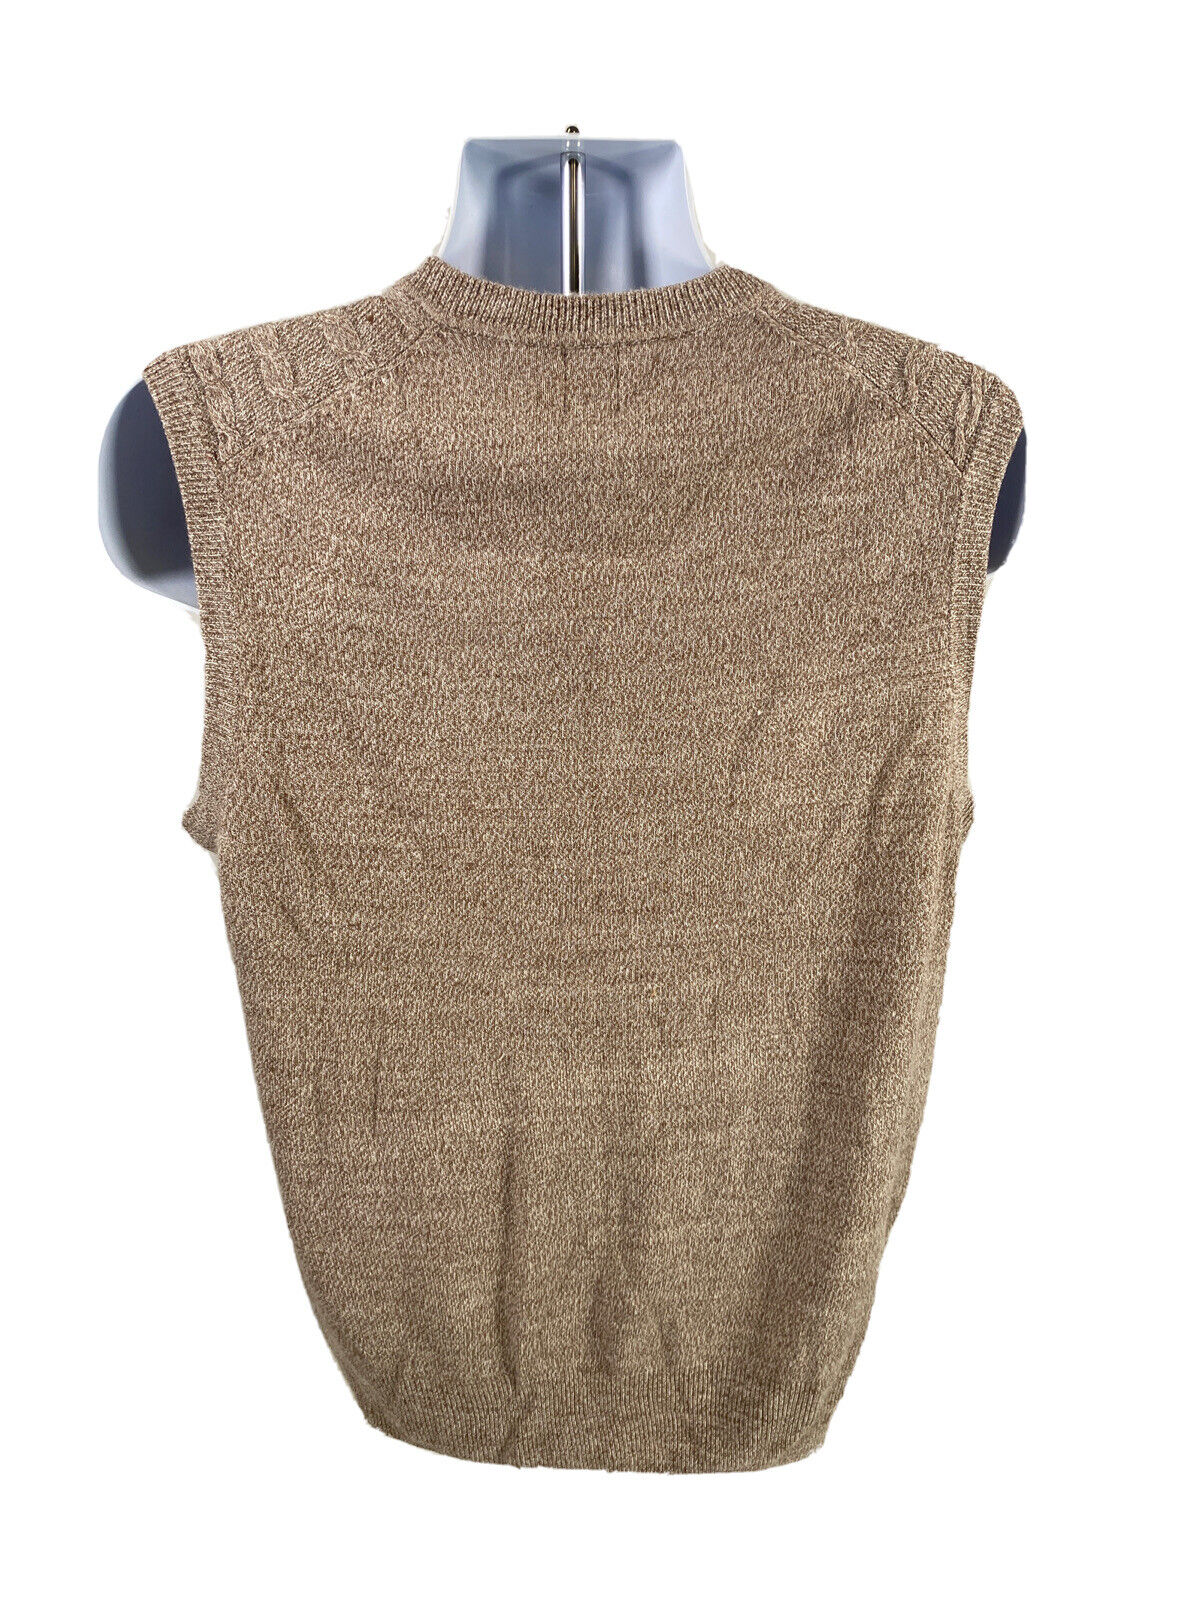 NEW Dockers Men's Brown Cable Knit Sleeveless Sweater Vest - M